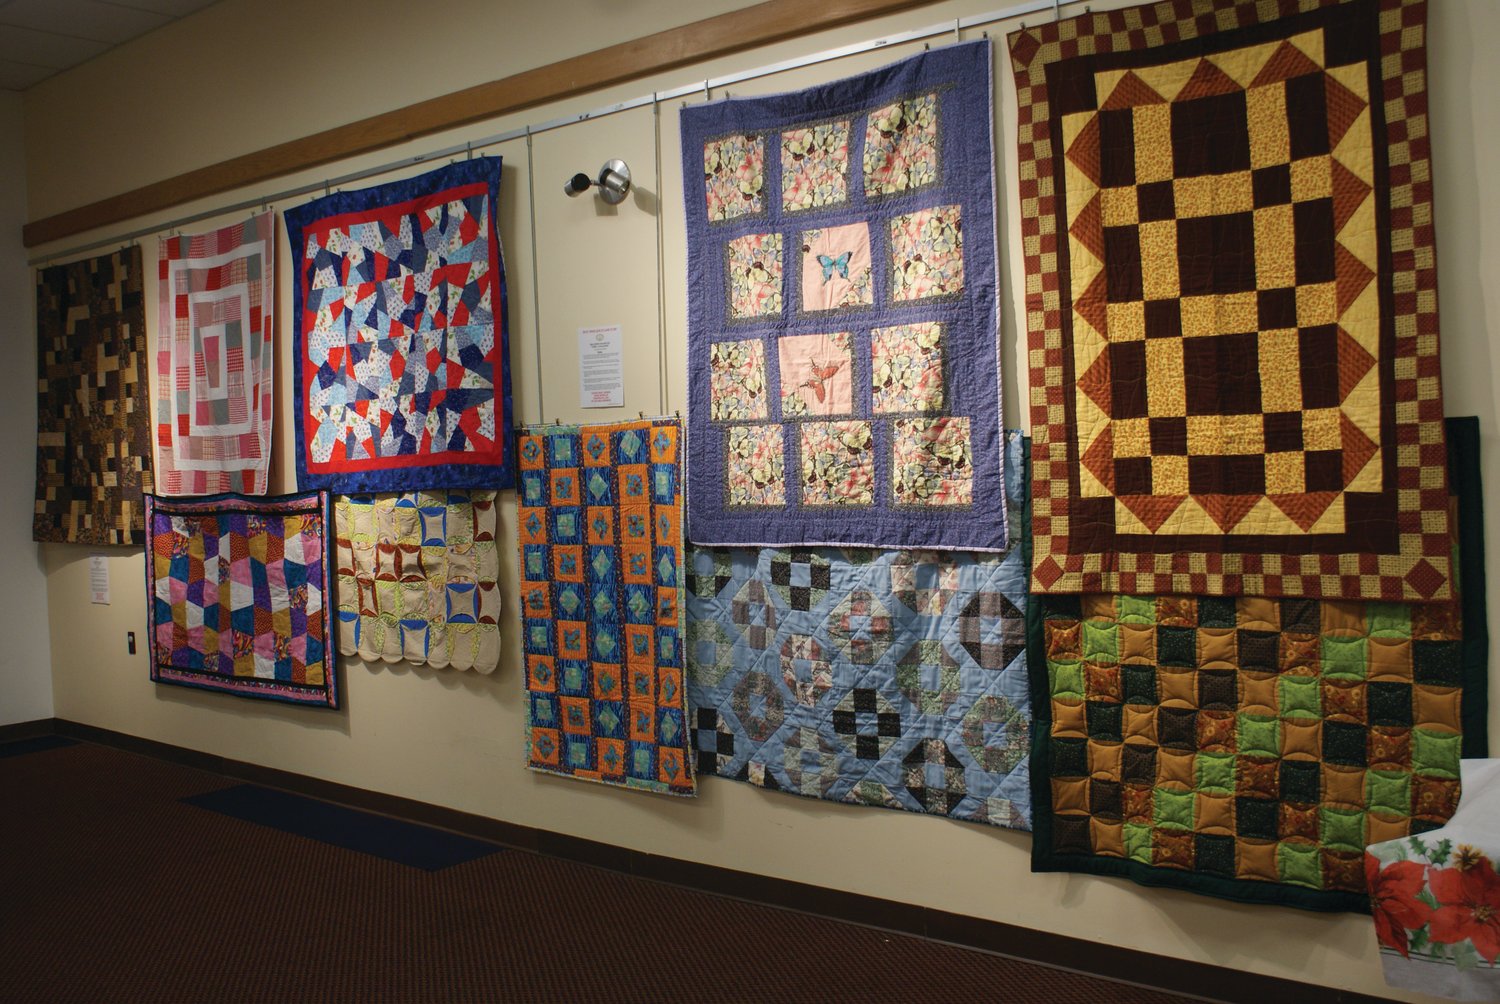 READY TO DONATE: All quilts will be donated to those in need after the Narragansett Bay Quilters’ Association completes its showing at Central Library.